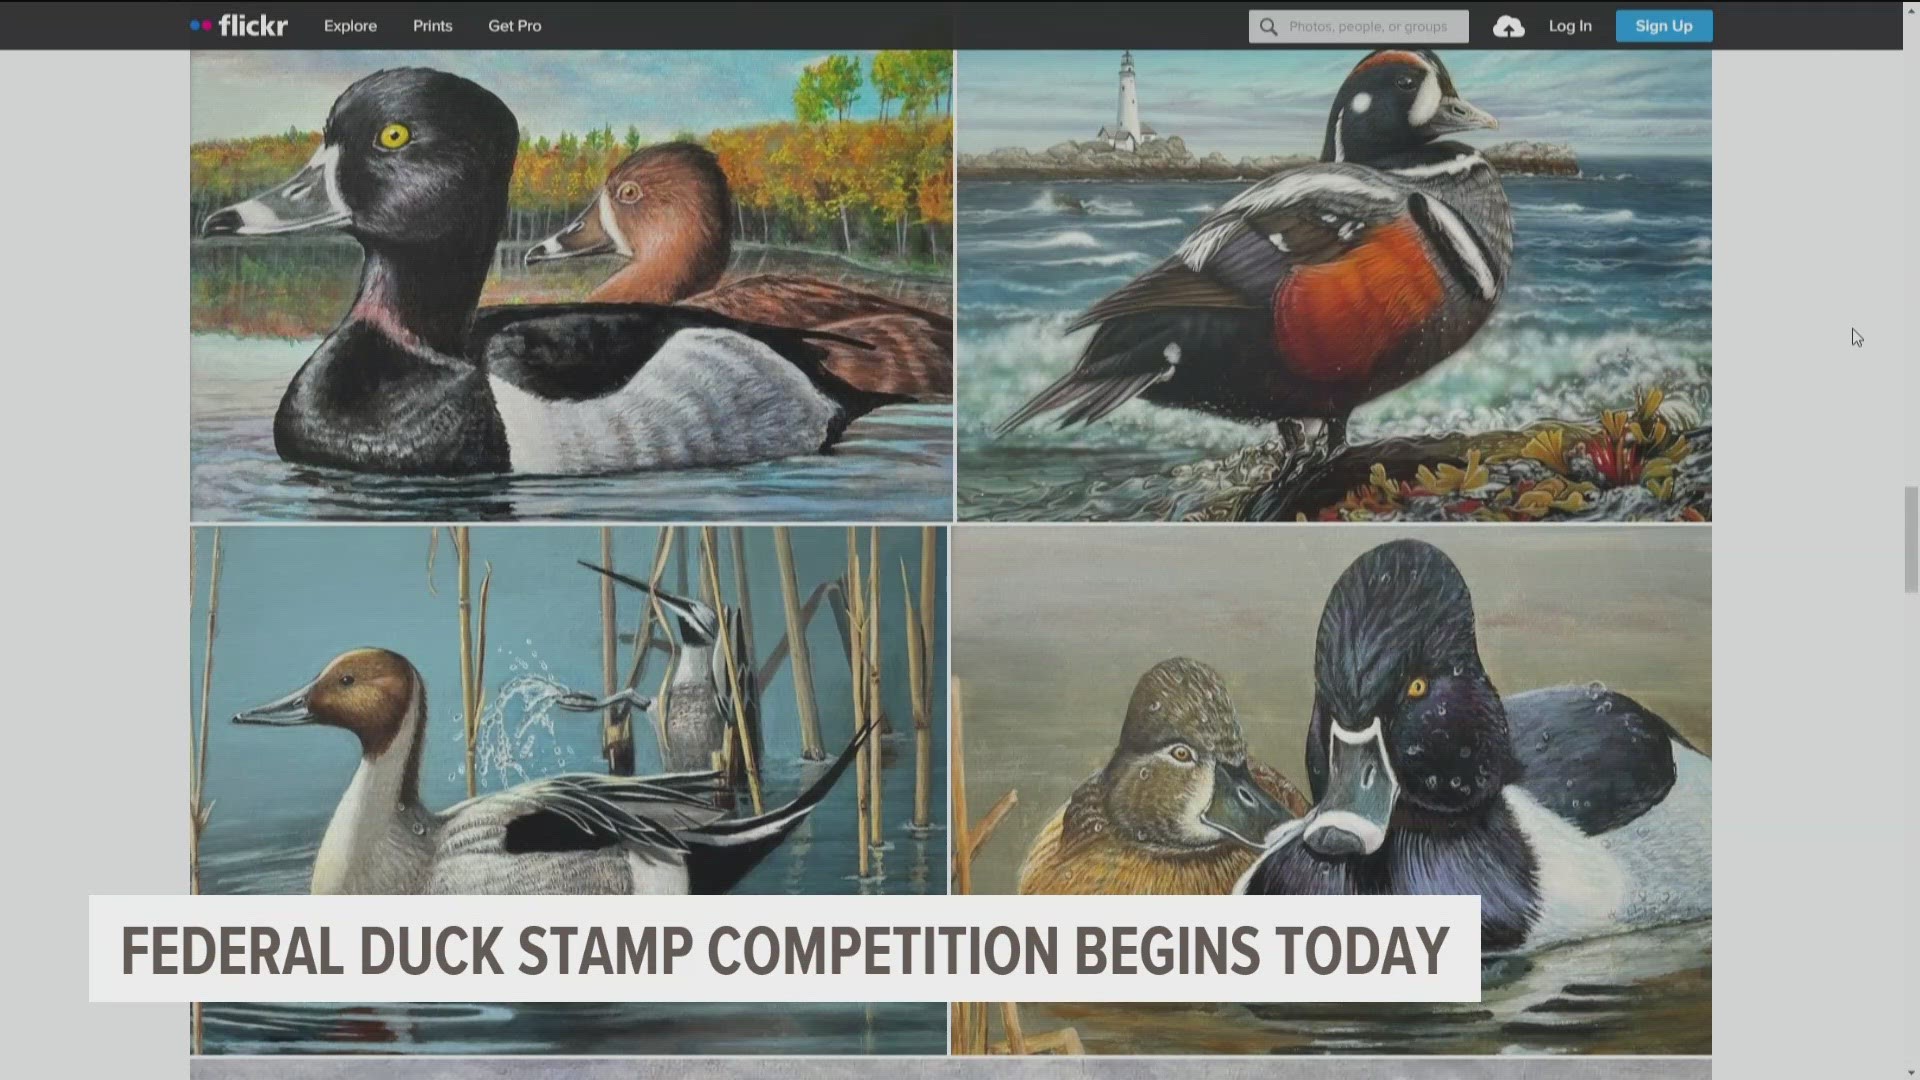 The Federal Duck Stamp Competition was conceived in 1934 after President Franklin D. Roosevelt signed it into law in the Migratory Bird Hunting and Conservation Act.